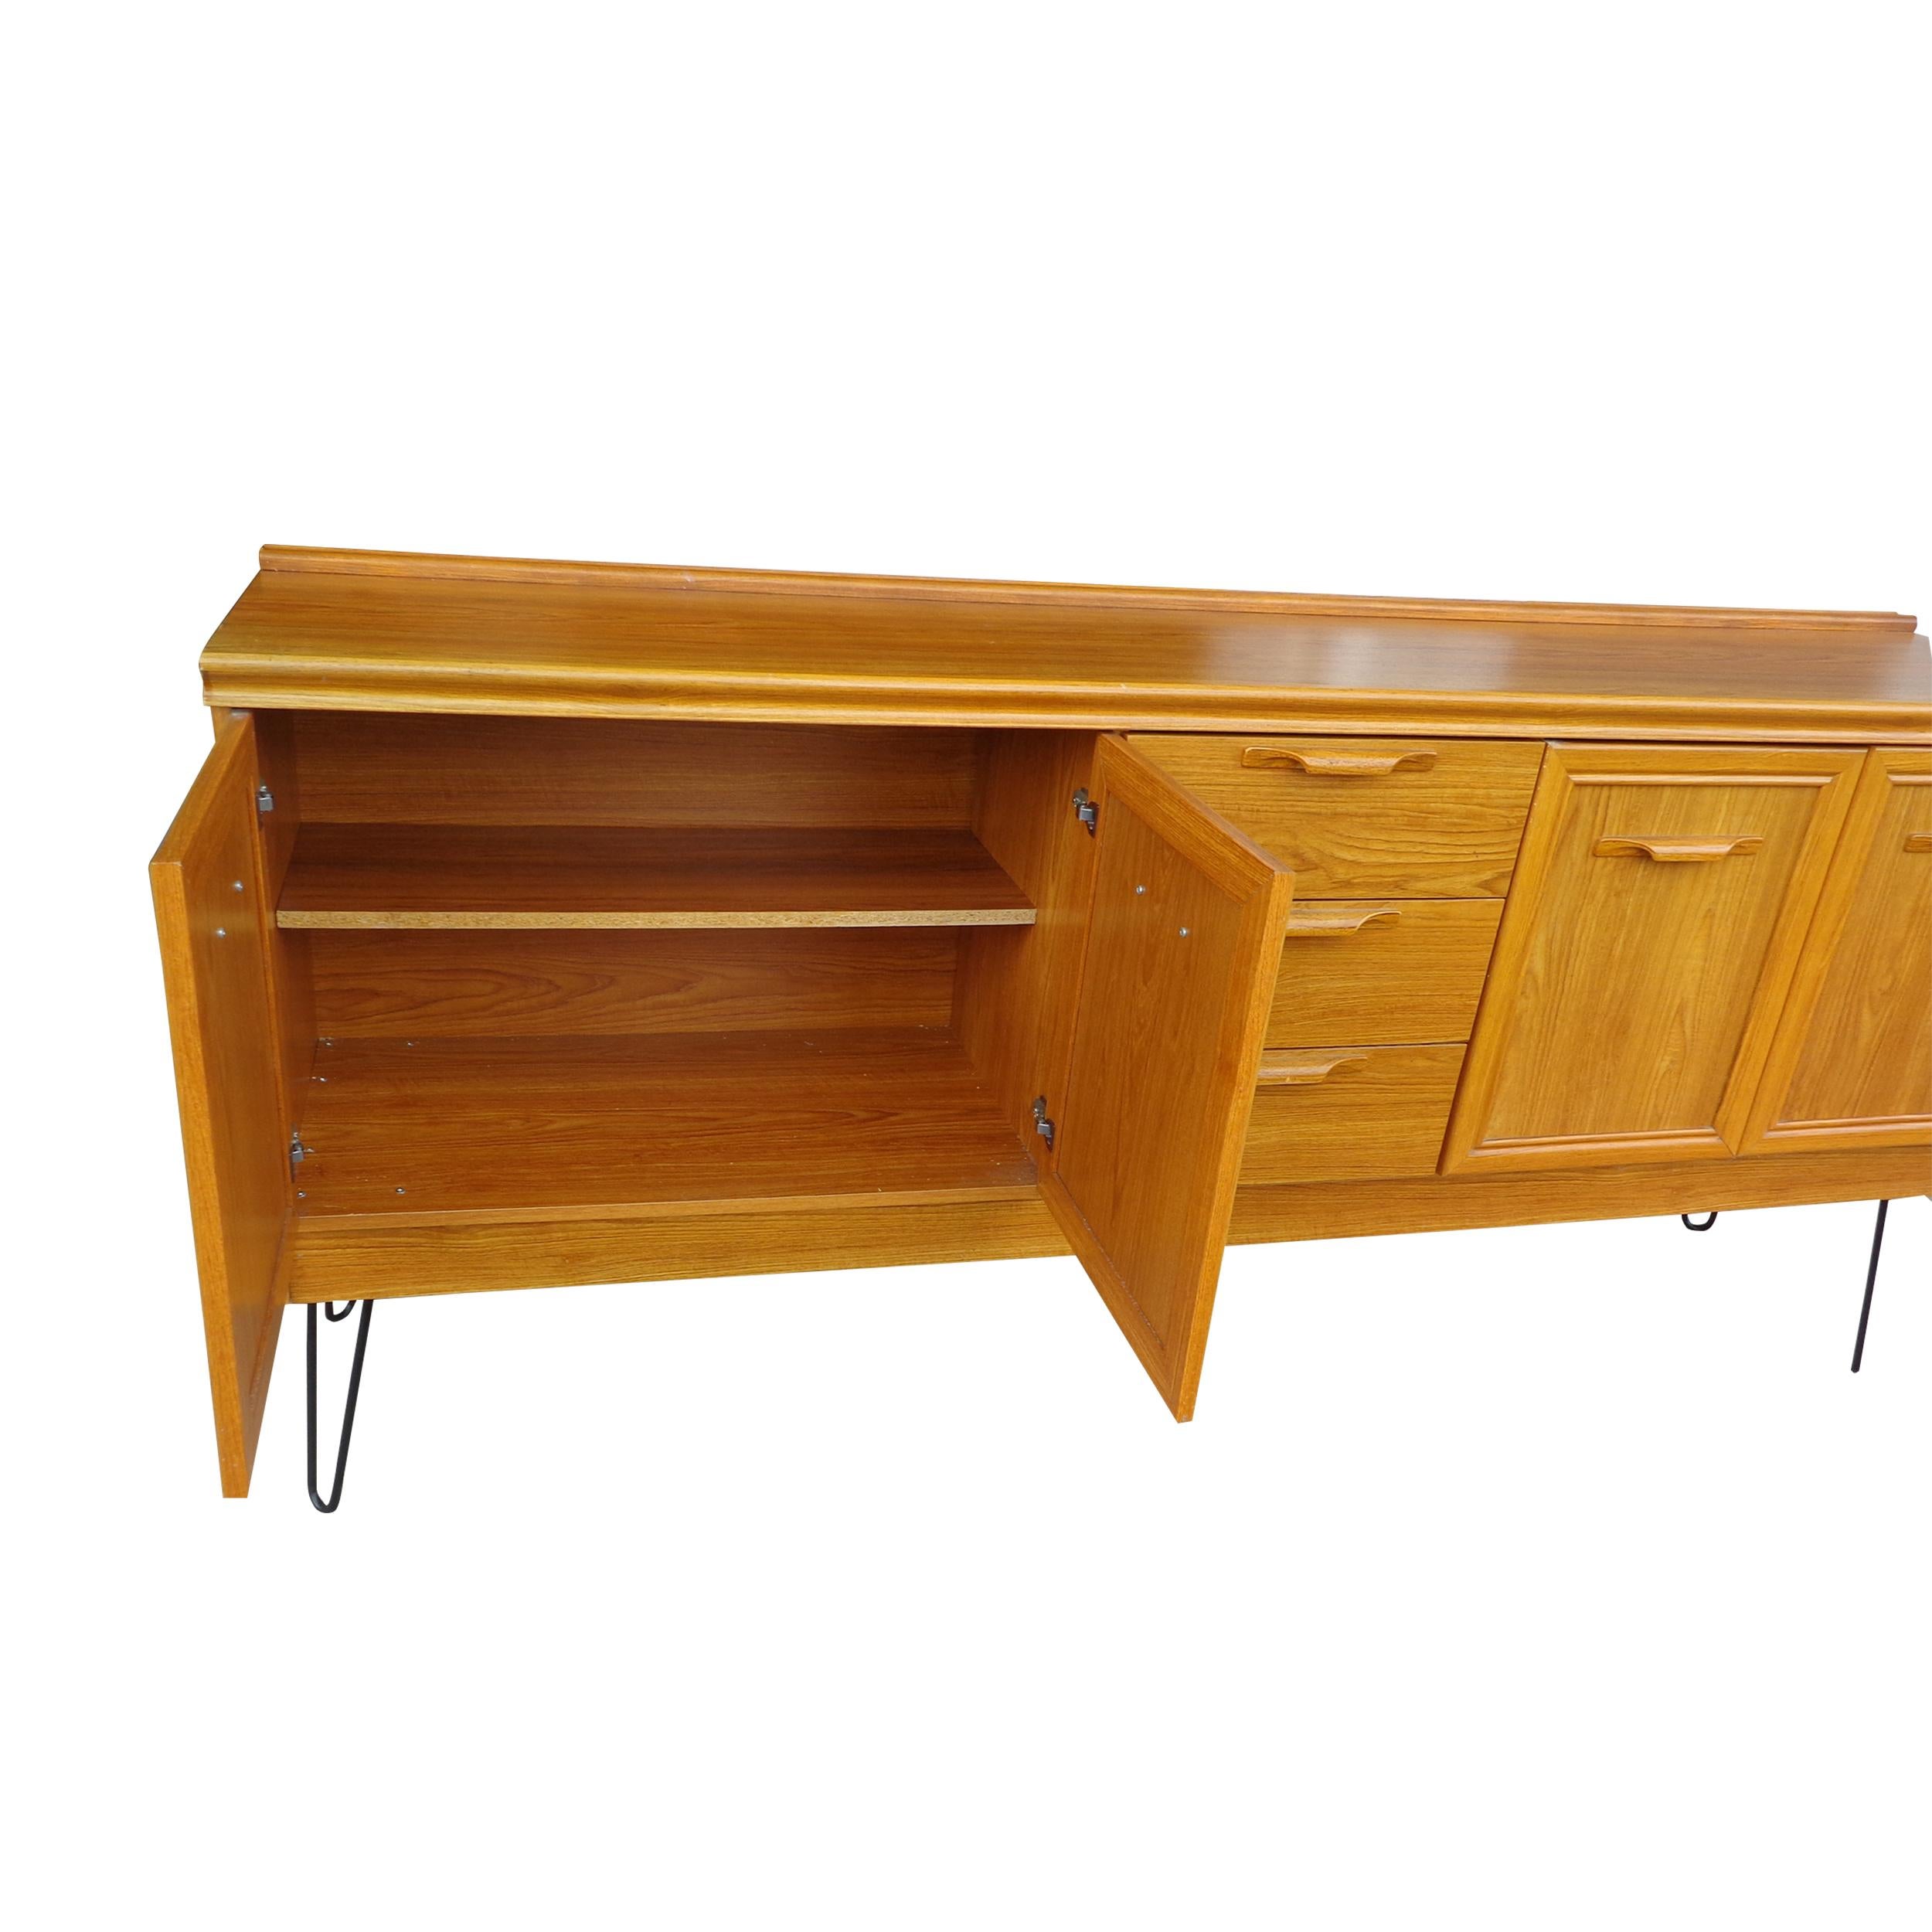 6ft Mid-Century Modern oak sideboard with hair pin legs by Jentique

This oak sideboard features a spacious double cupboard and three drawers. Sculptural folded handles. Updated with hairpin legs in black.

